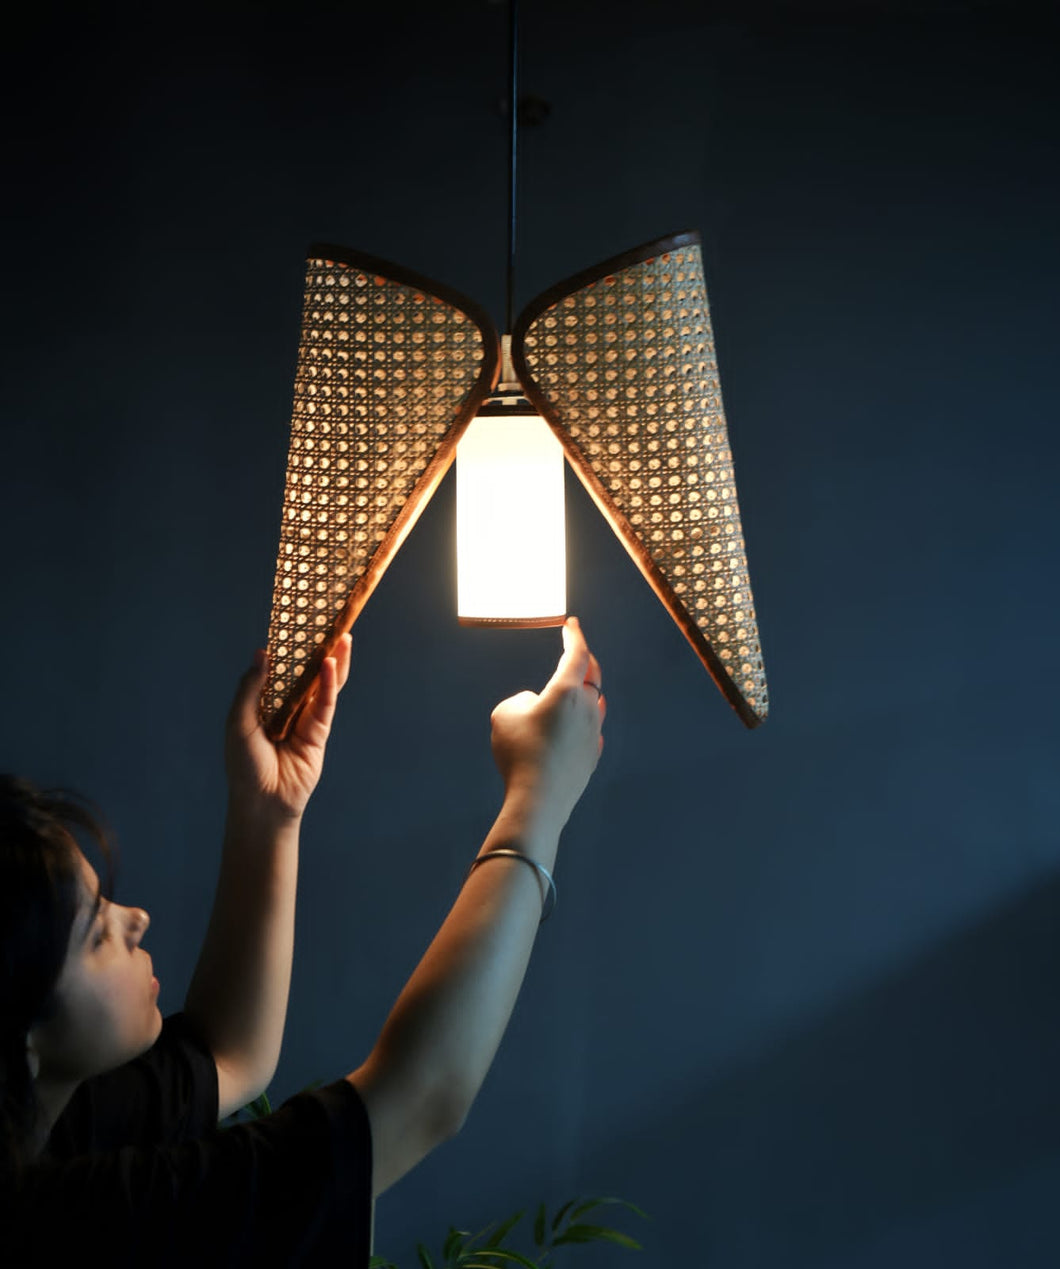 Firefly Glow - Unique handmade Woven Hanging Pendant Light, Natural/Cane Pendant Light for Home restaurants and offices.